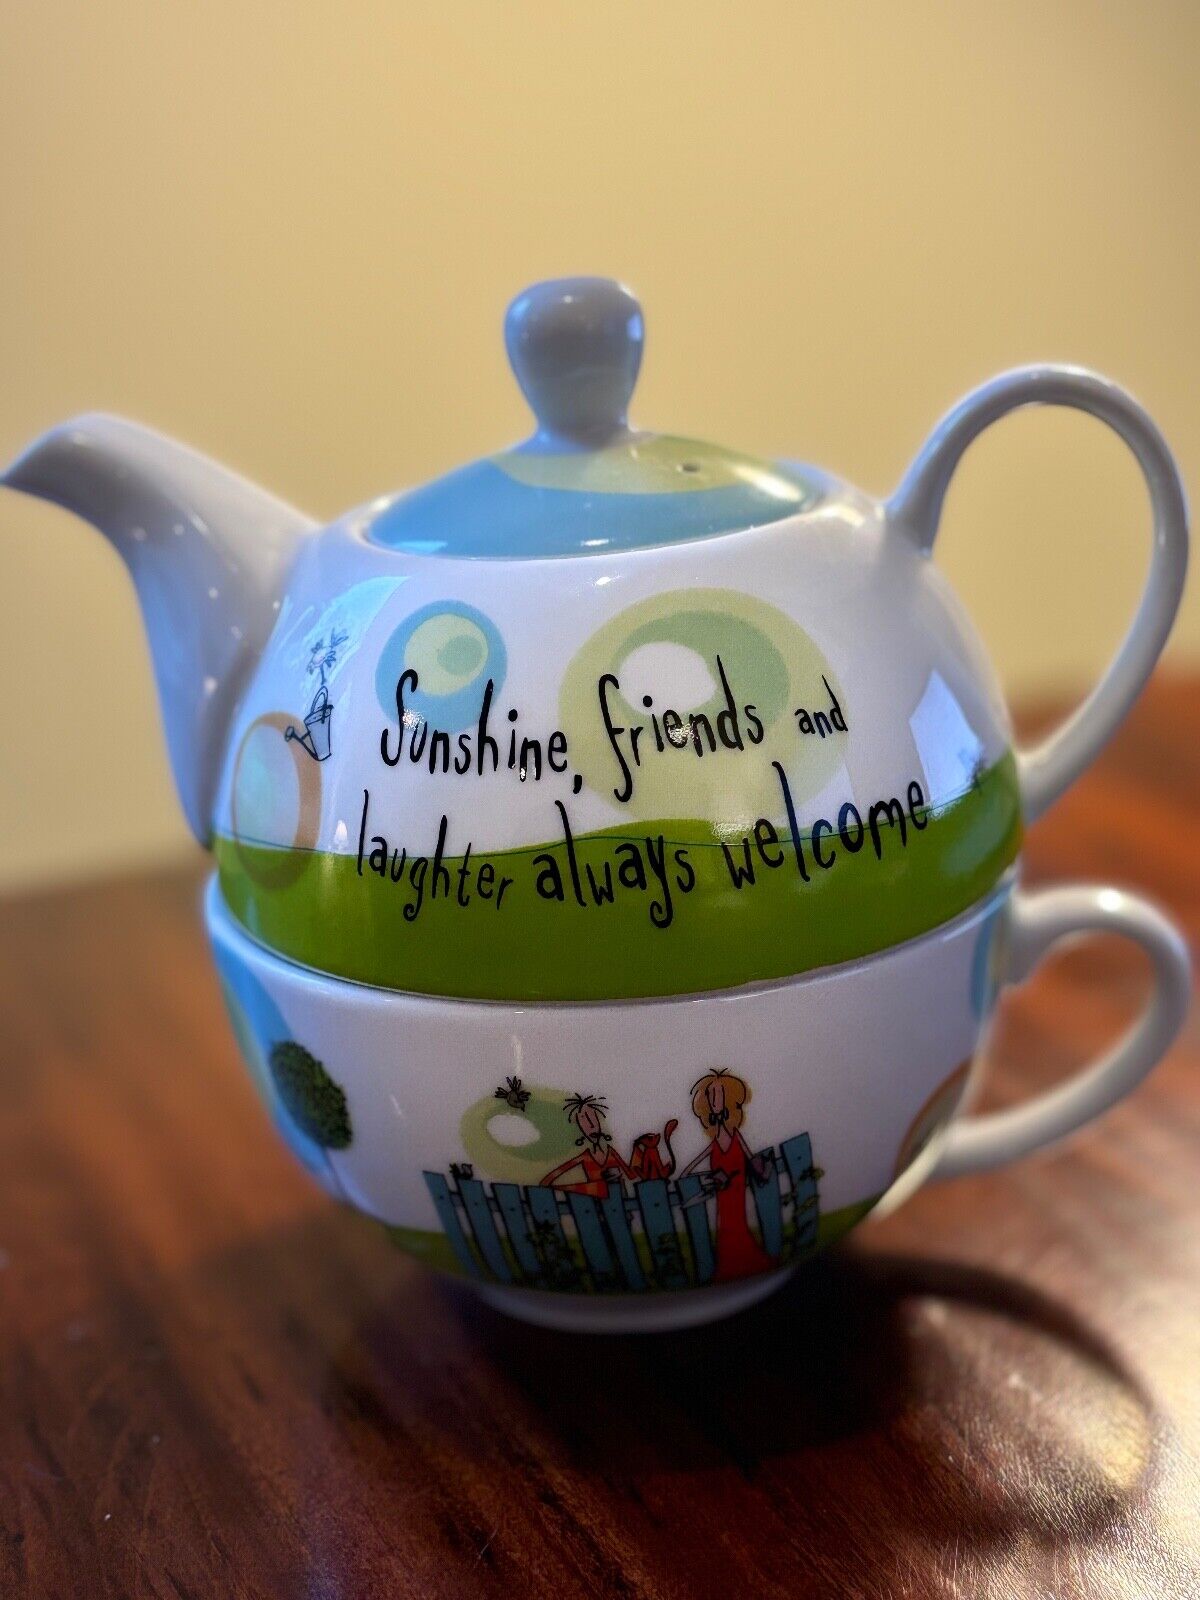 CREATIVE TOPS  mbc TEA FOR ONE Born To Shop SUNSHINE FRIENDS LAUGHTER Teapot Cup